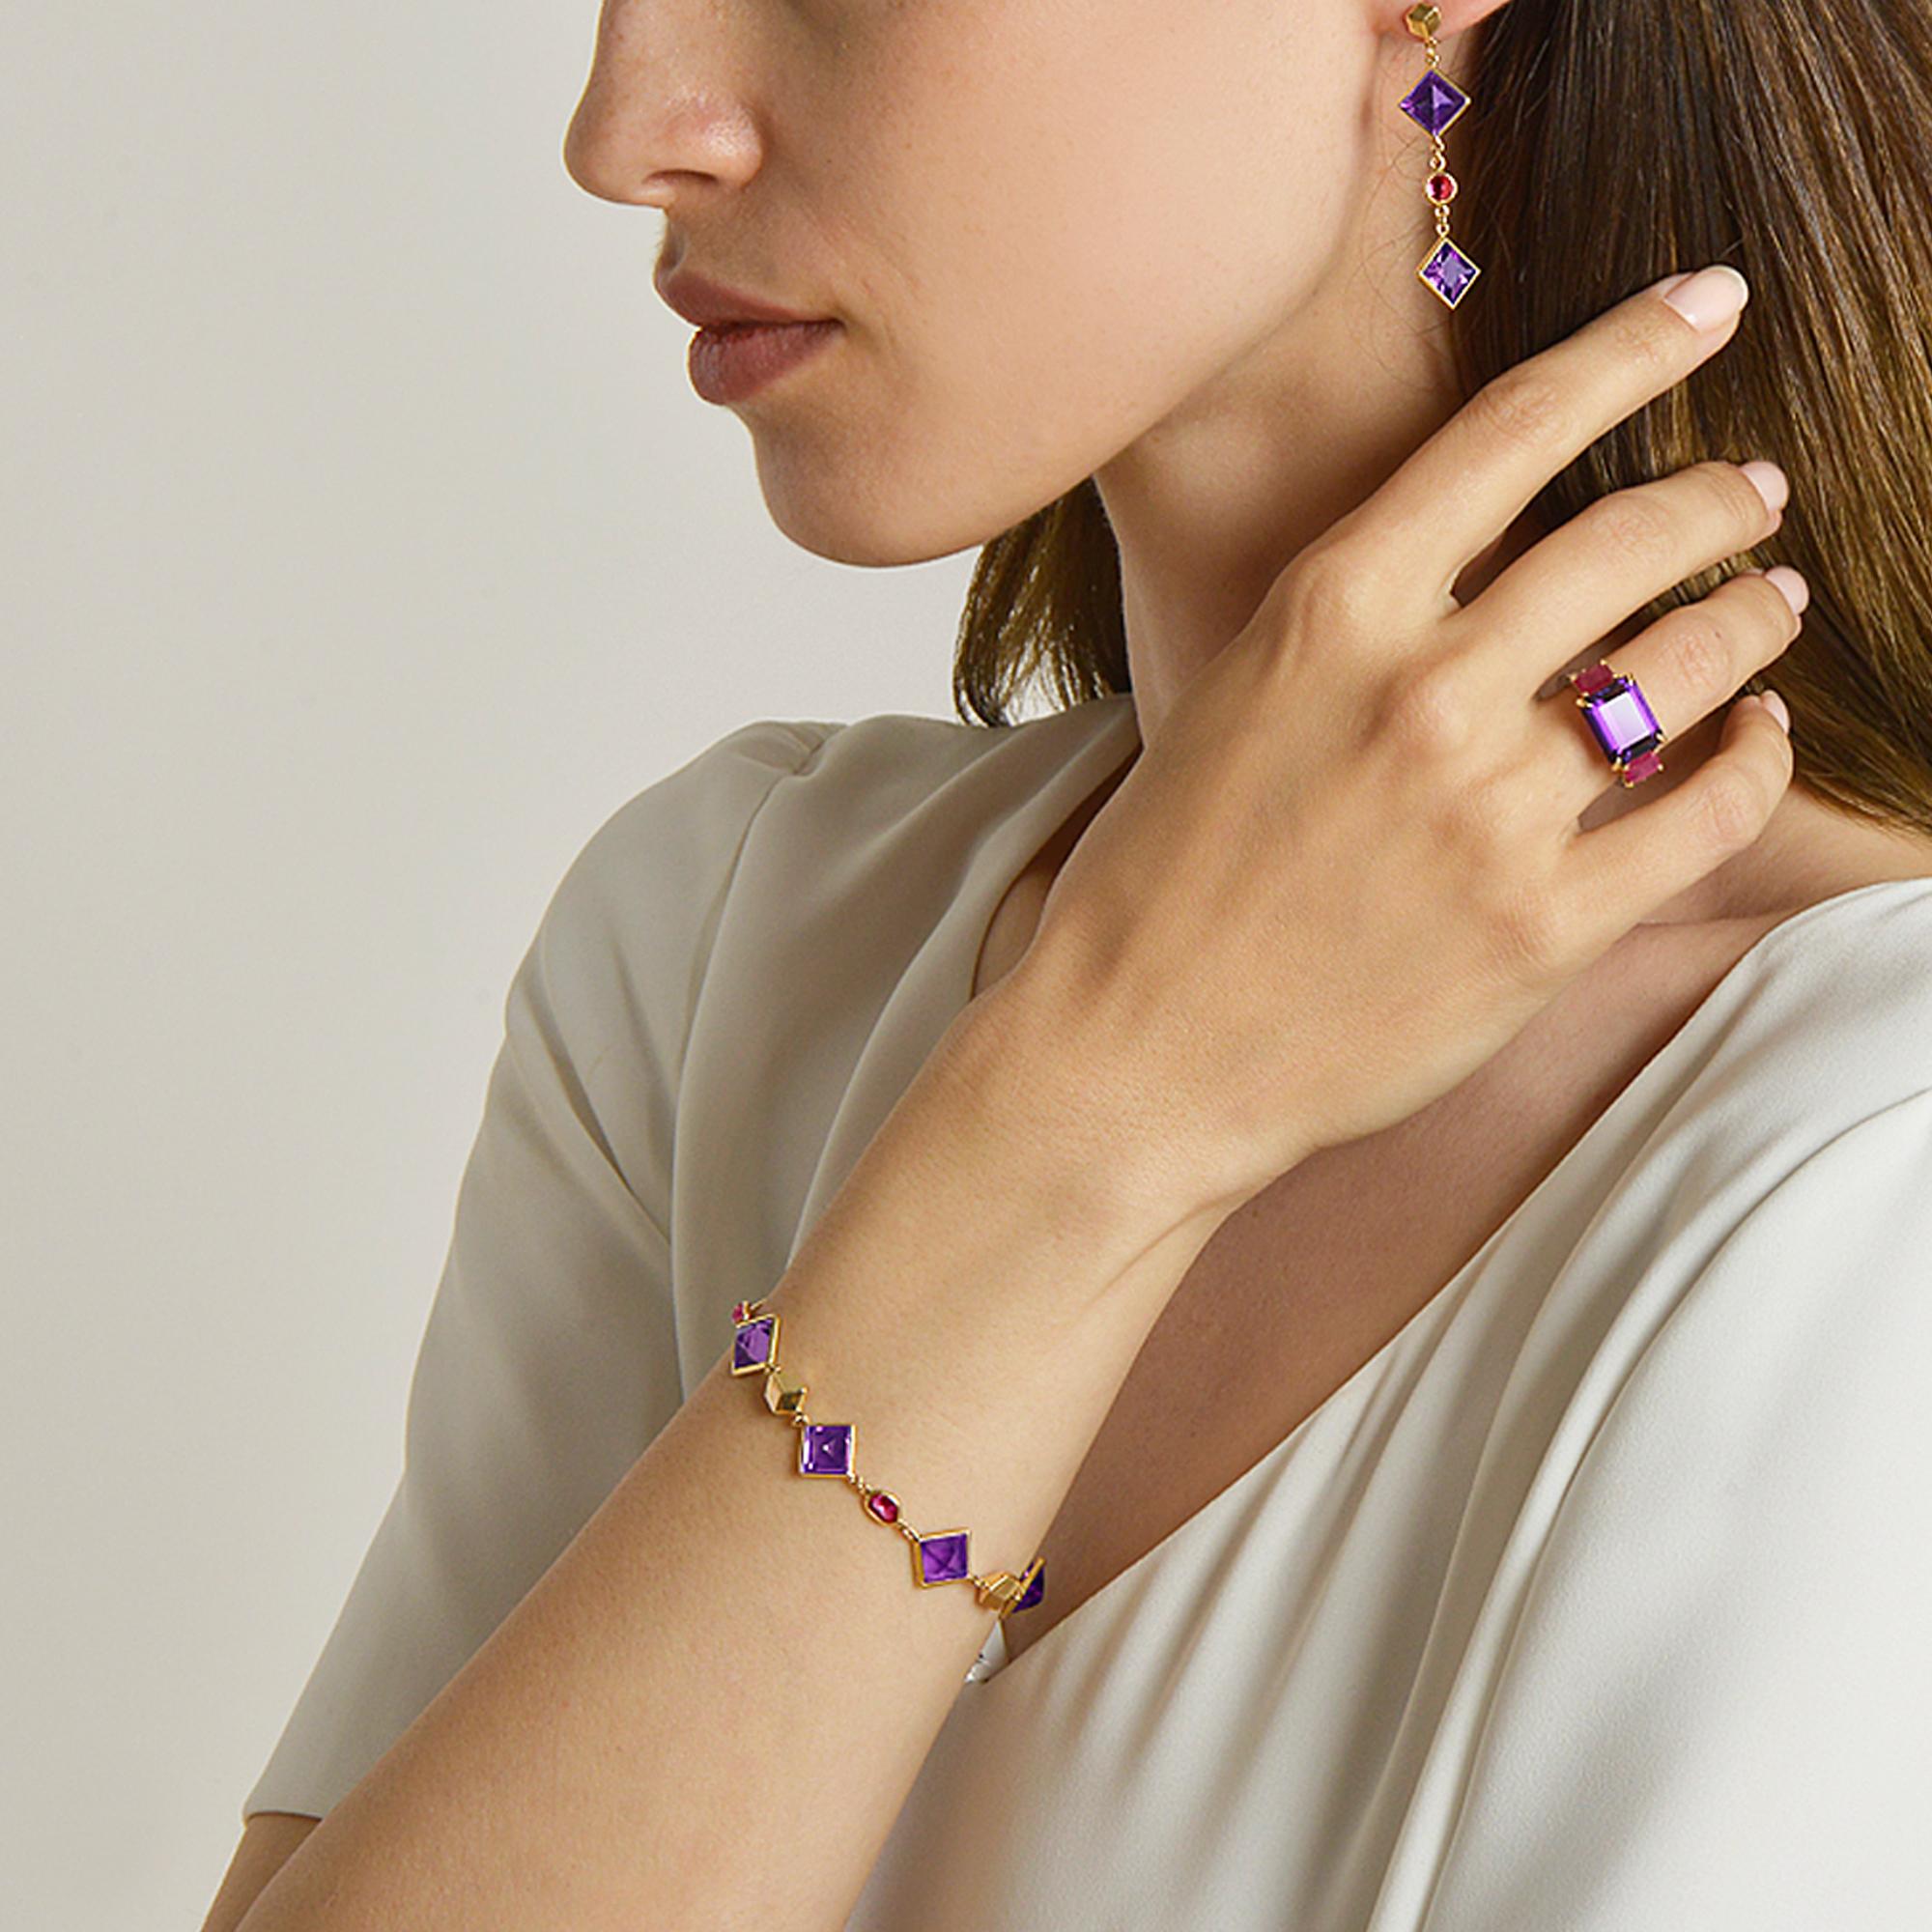 18kt yellow gold Florentine bracelet with bezel set emerald-cut amethyst and oval rubies, and signature Brillante® detail.

Inspired by the Garden of the Iris, the Florentine collection pairs bold color combinations of geometric gemstones to